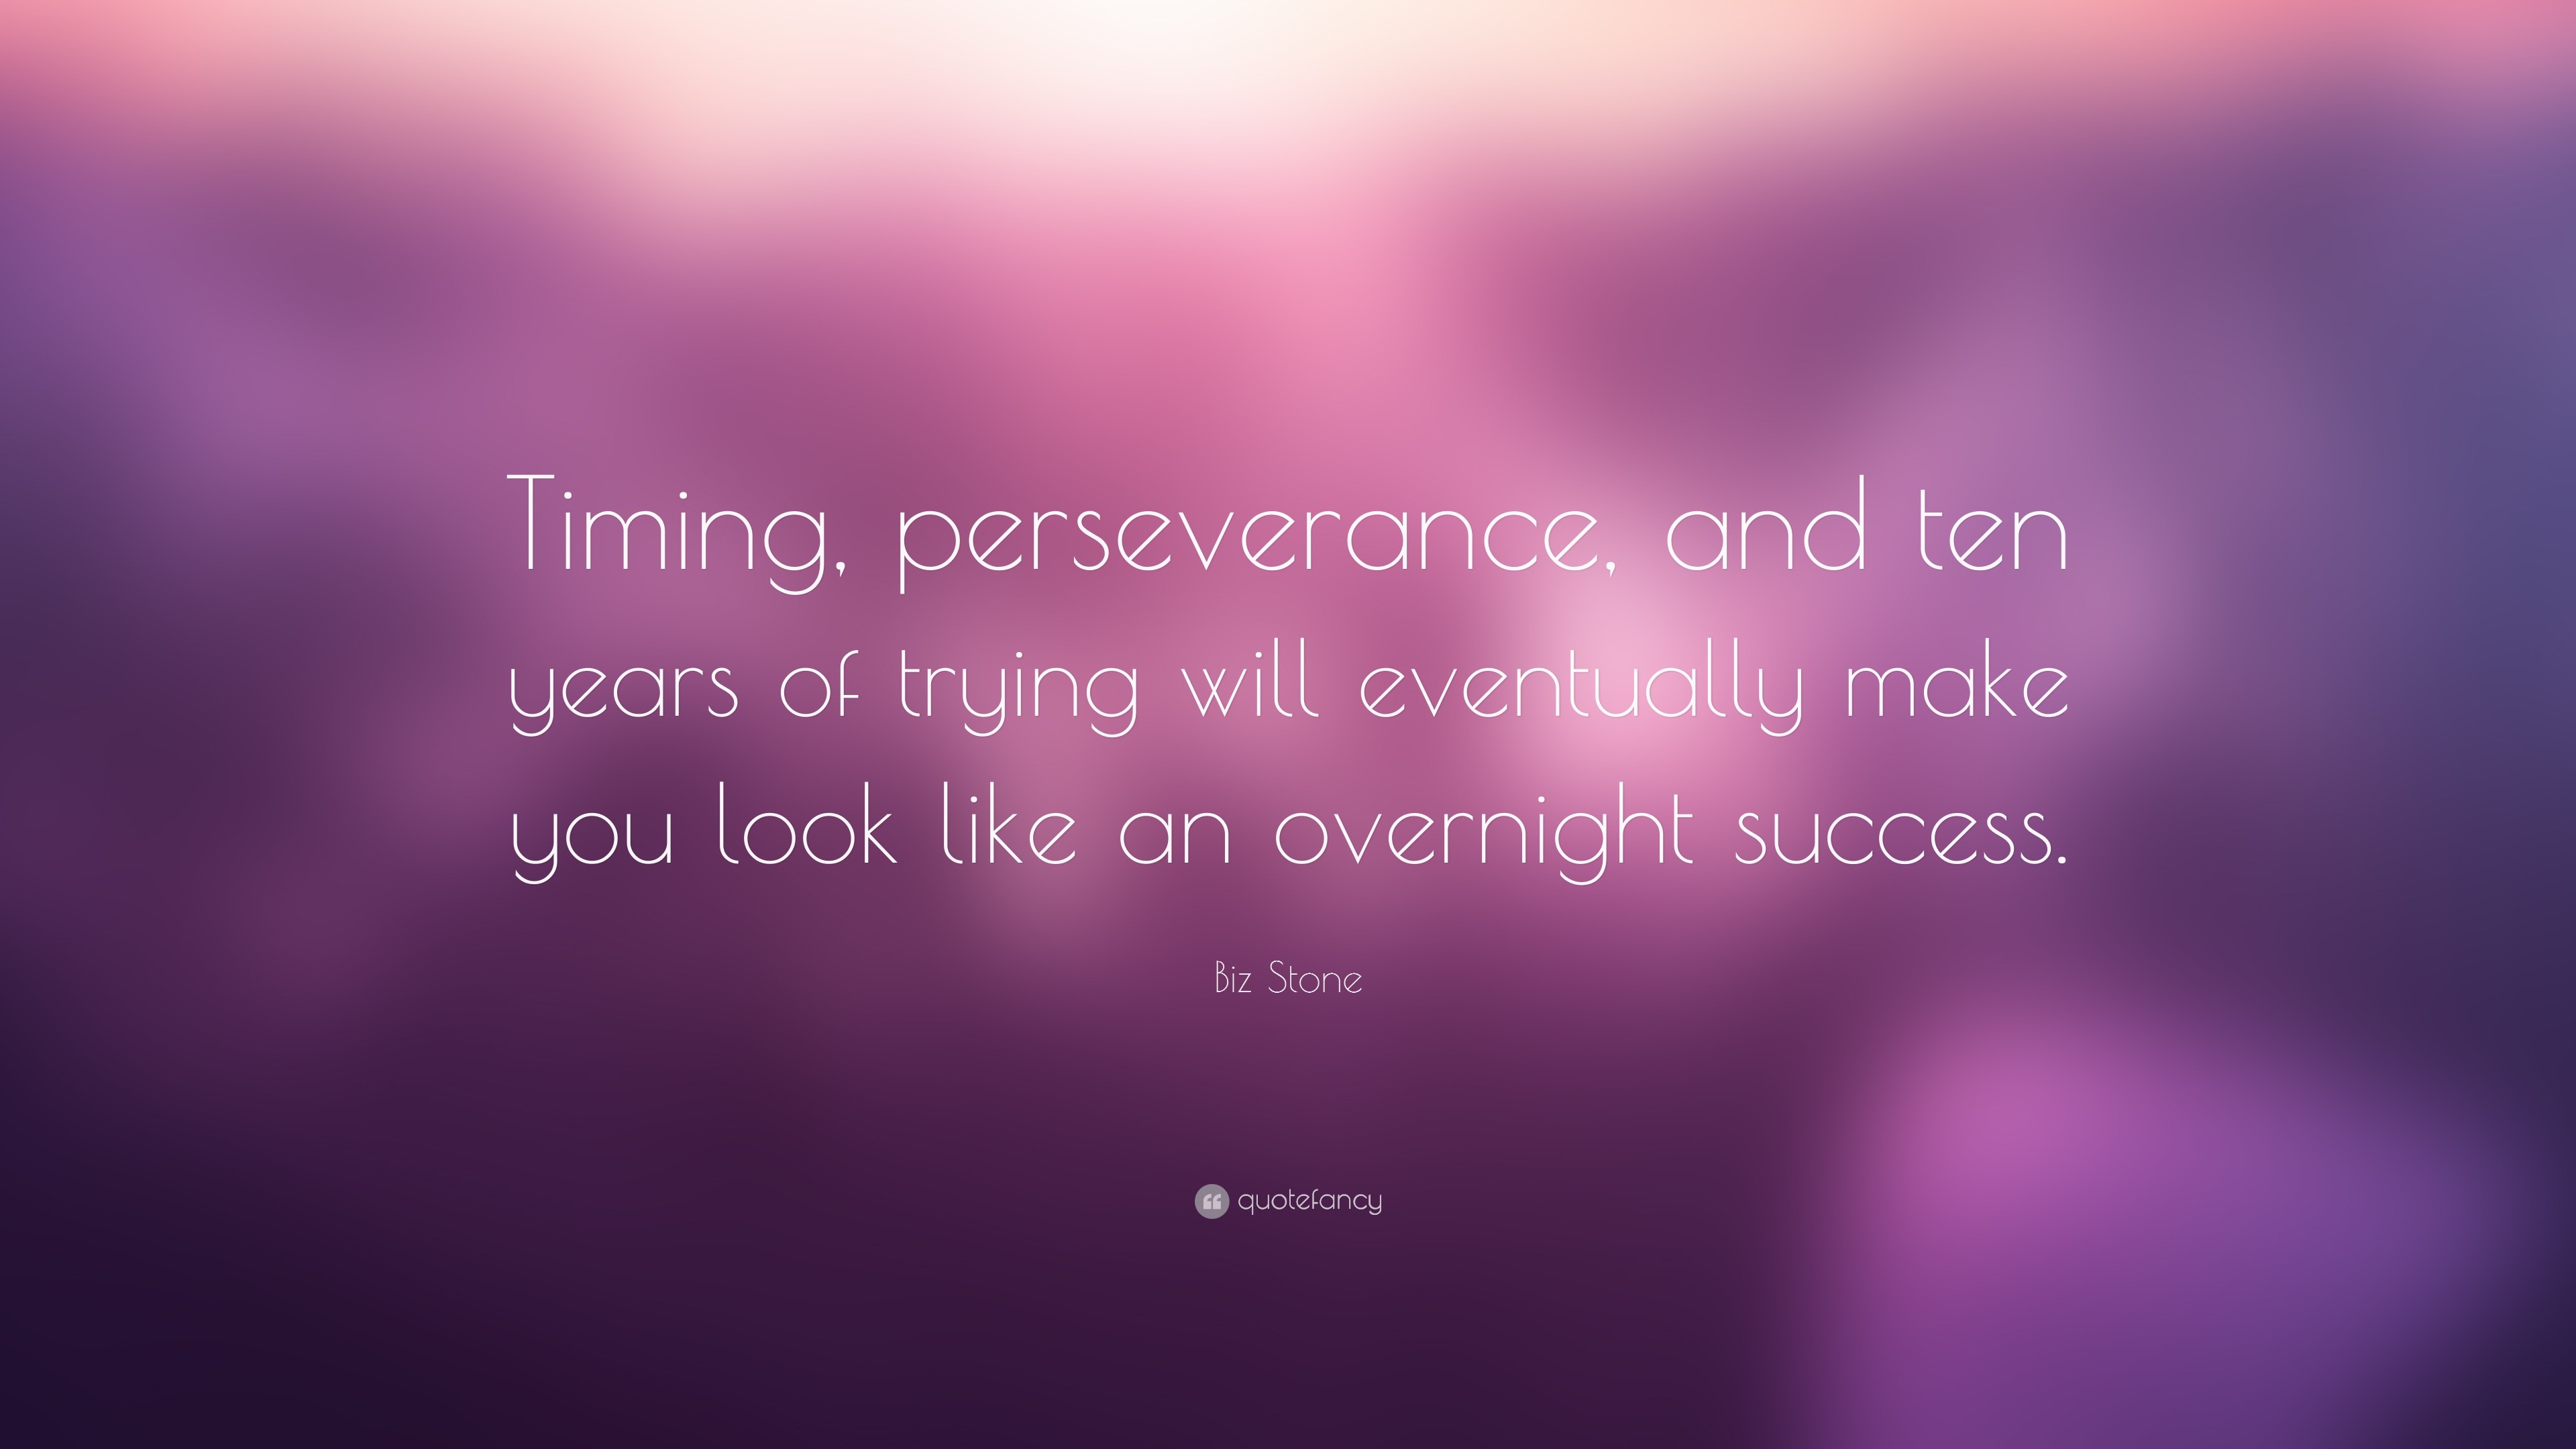 Biz Stone Quote “Timing perseverance and ten years of trying will eventually